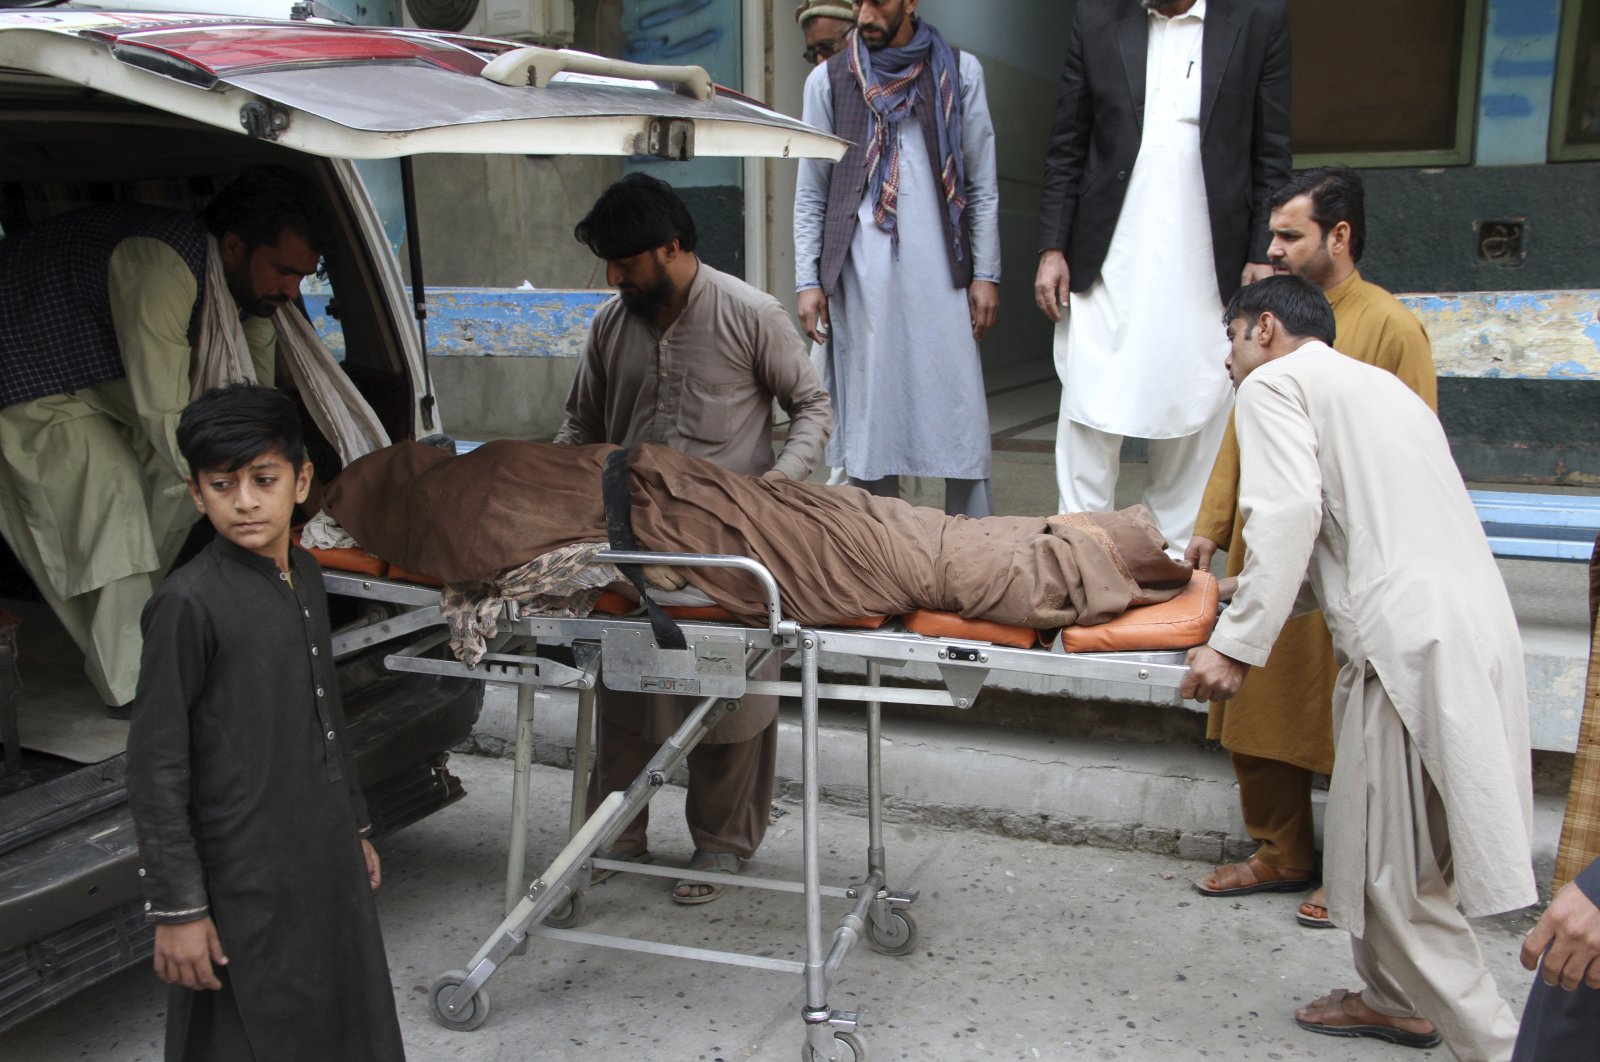 Afghans carry the body of a woman who was killed in a stampede in the city of Jalalabad east of Kabul, Afghanistan, Oct. 21, 2020. (AP Photo)